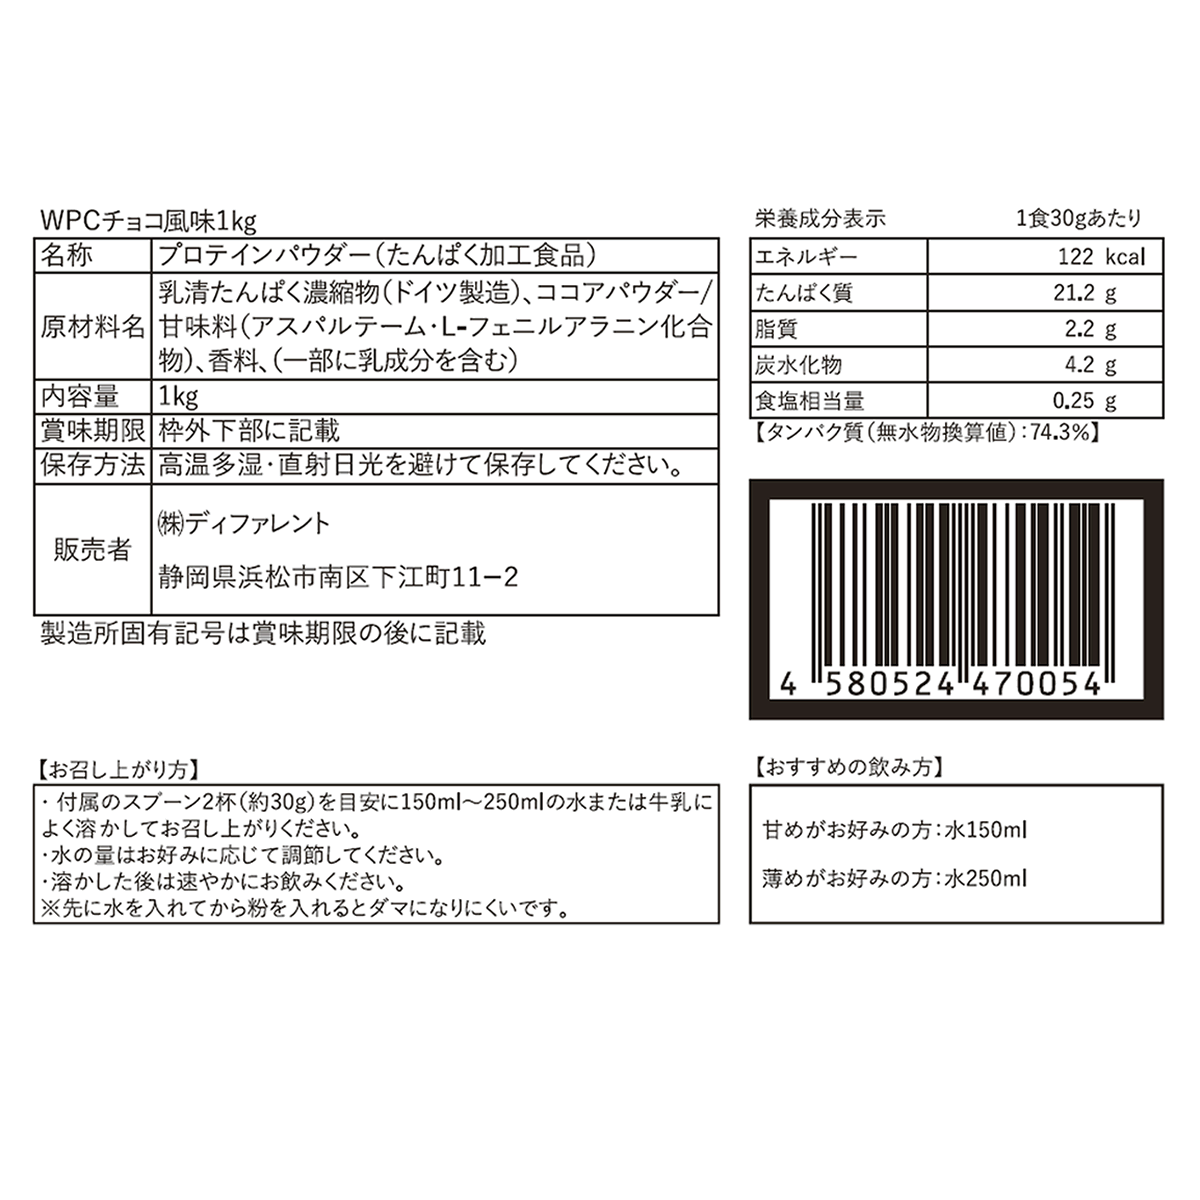 WPC チョコレート風味 1kg